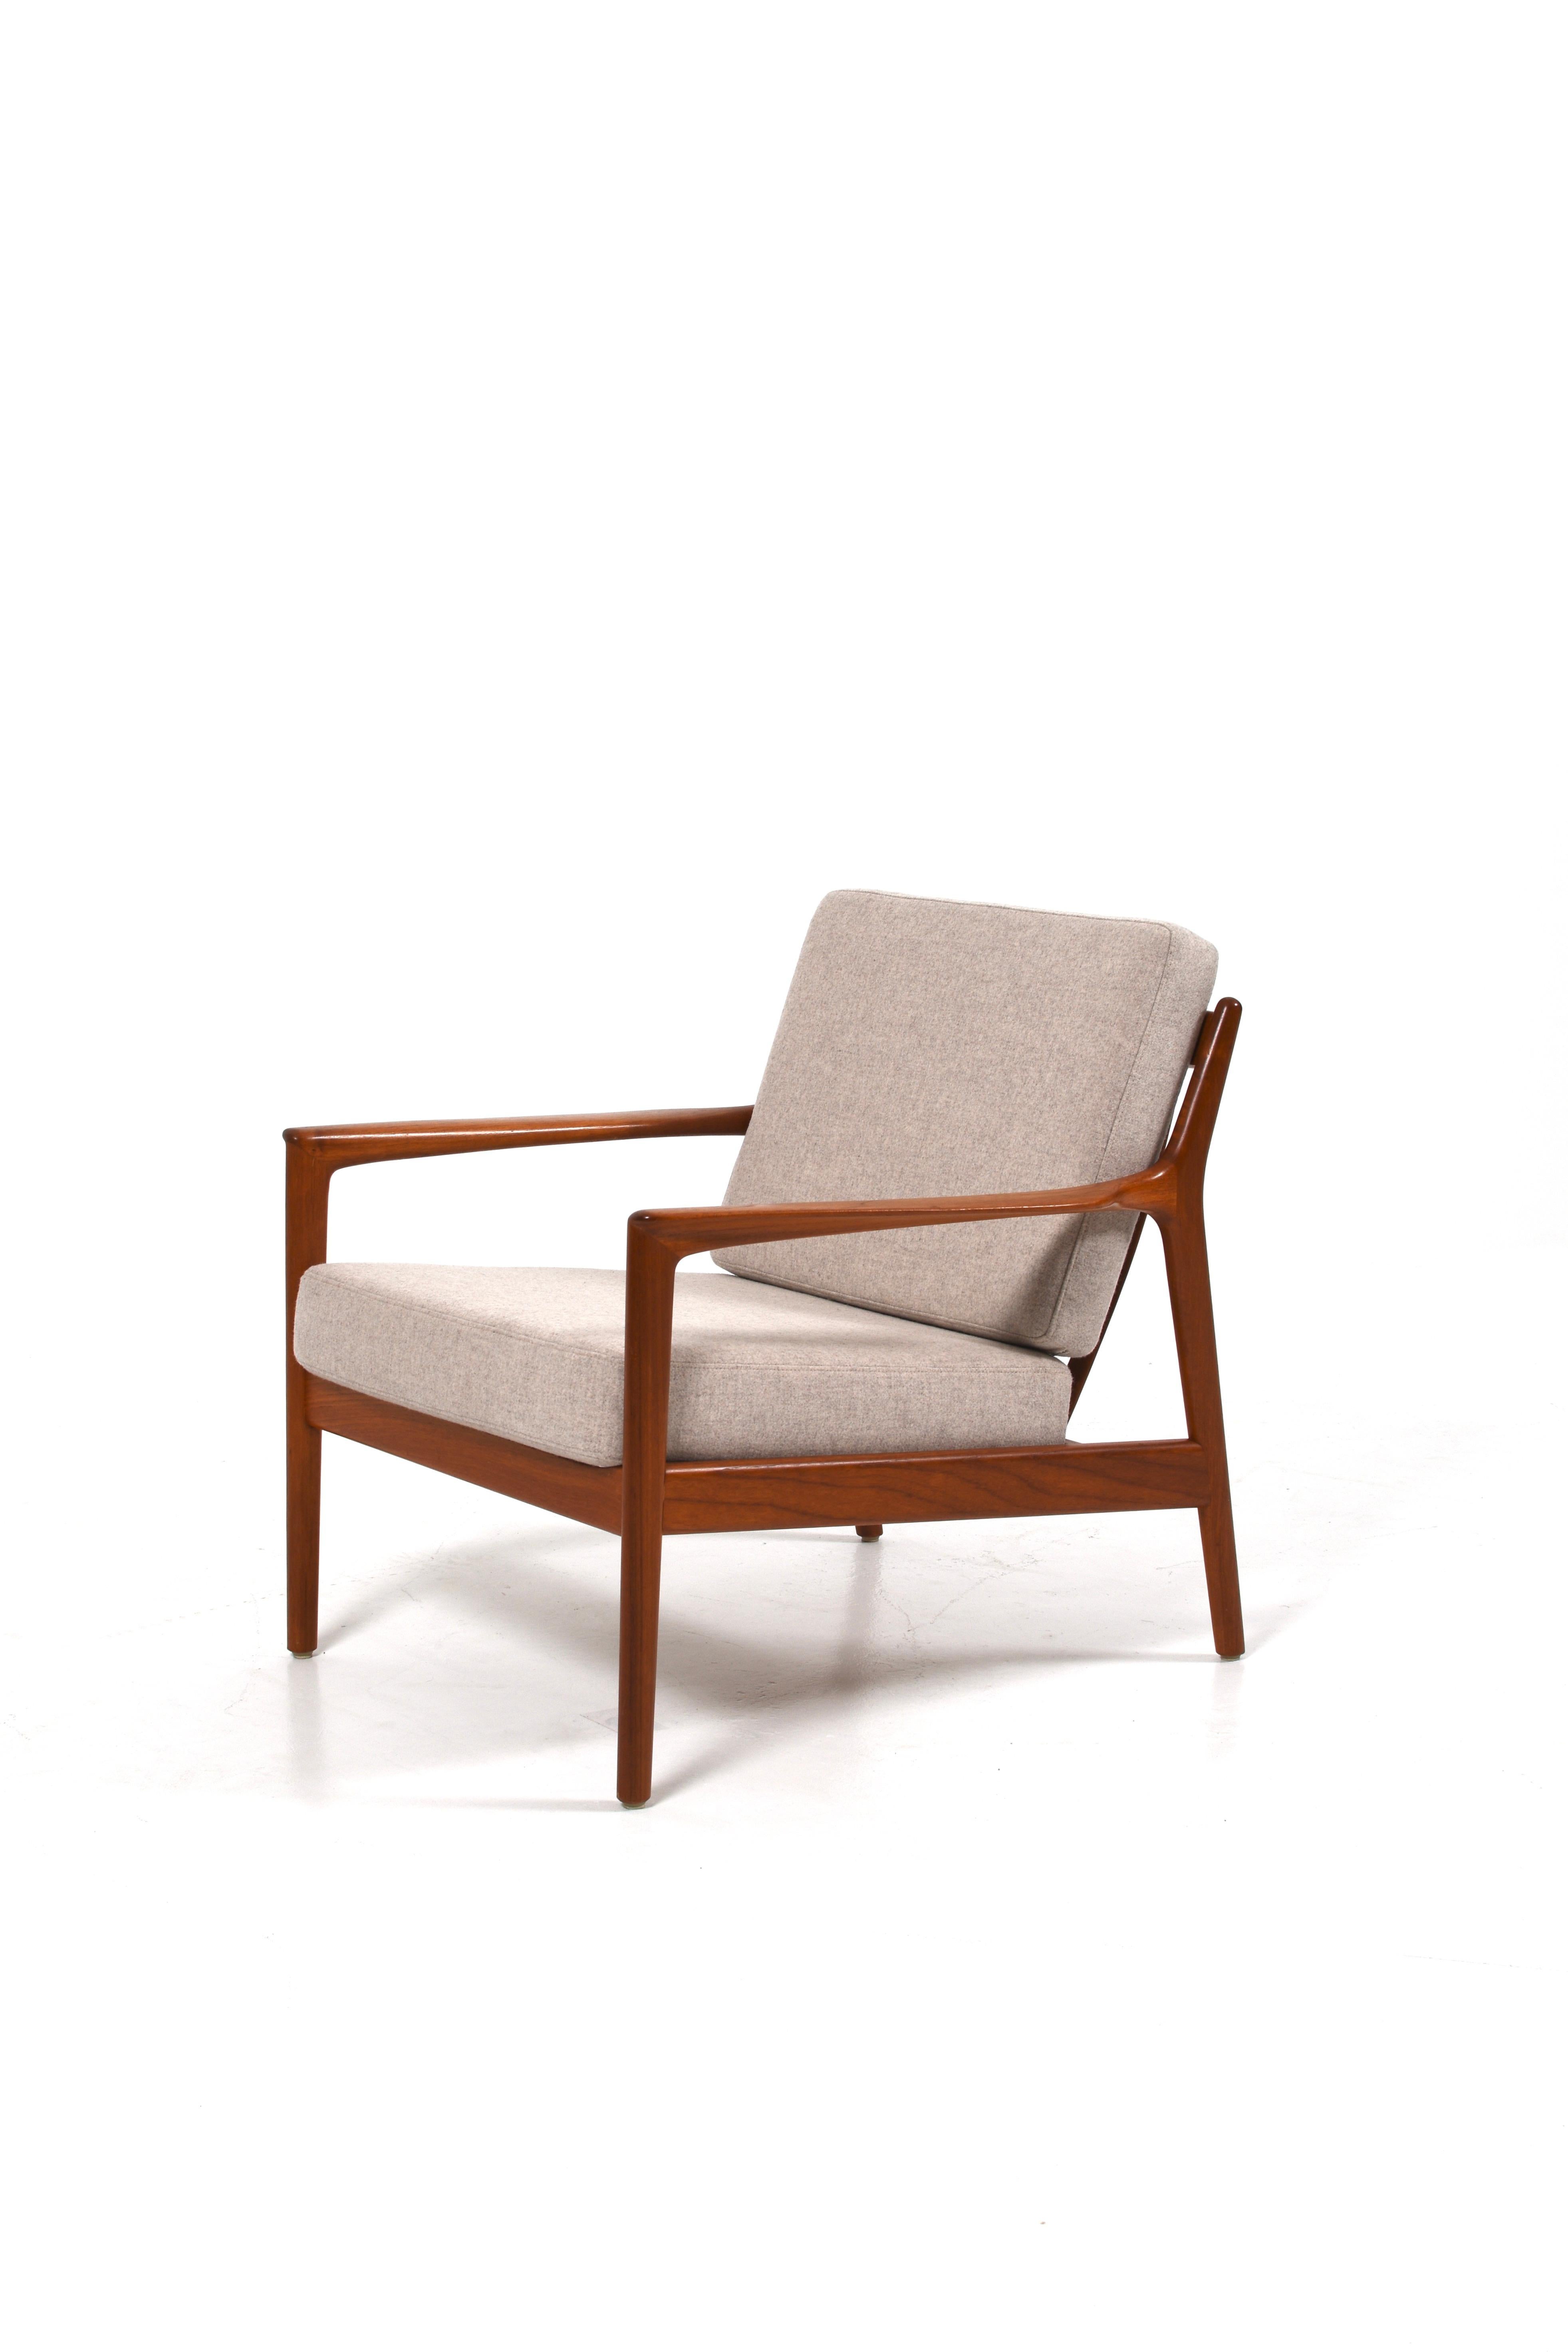 Pair of “USA 75” Teak Lounge Chairs by Folke Ohlsson for DUX, Sweden, 1960s For Sale 5